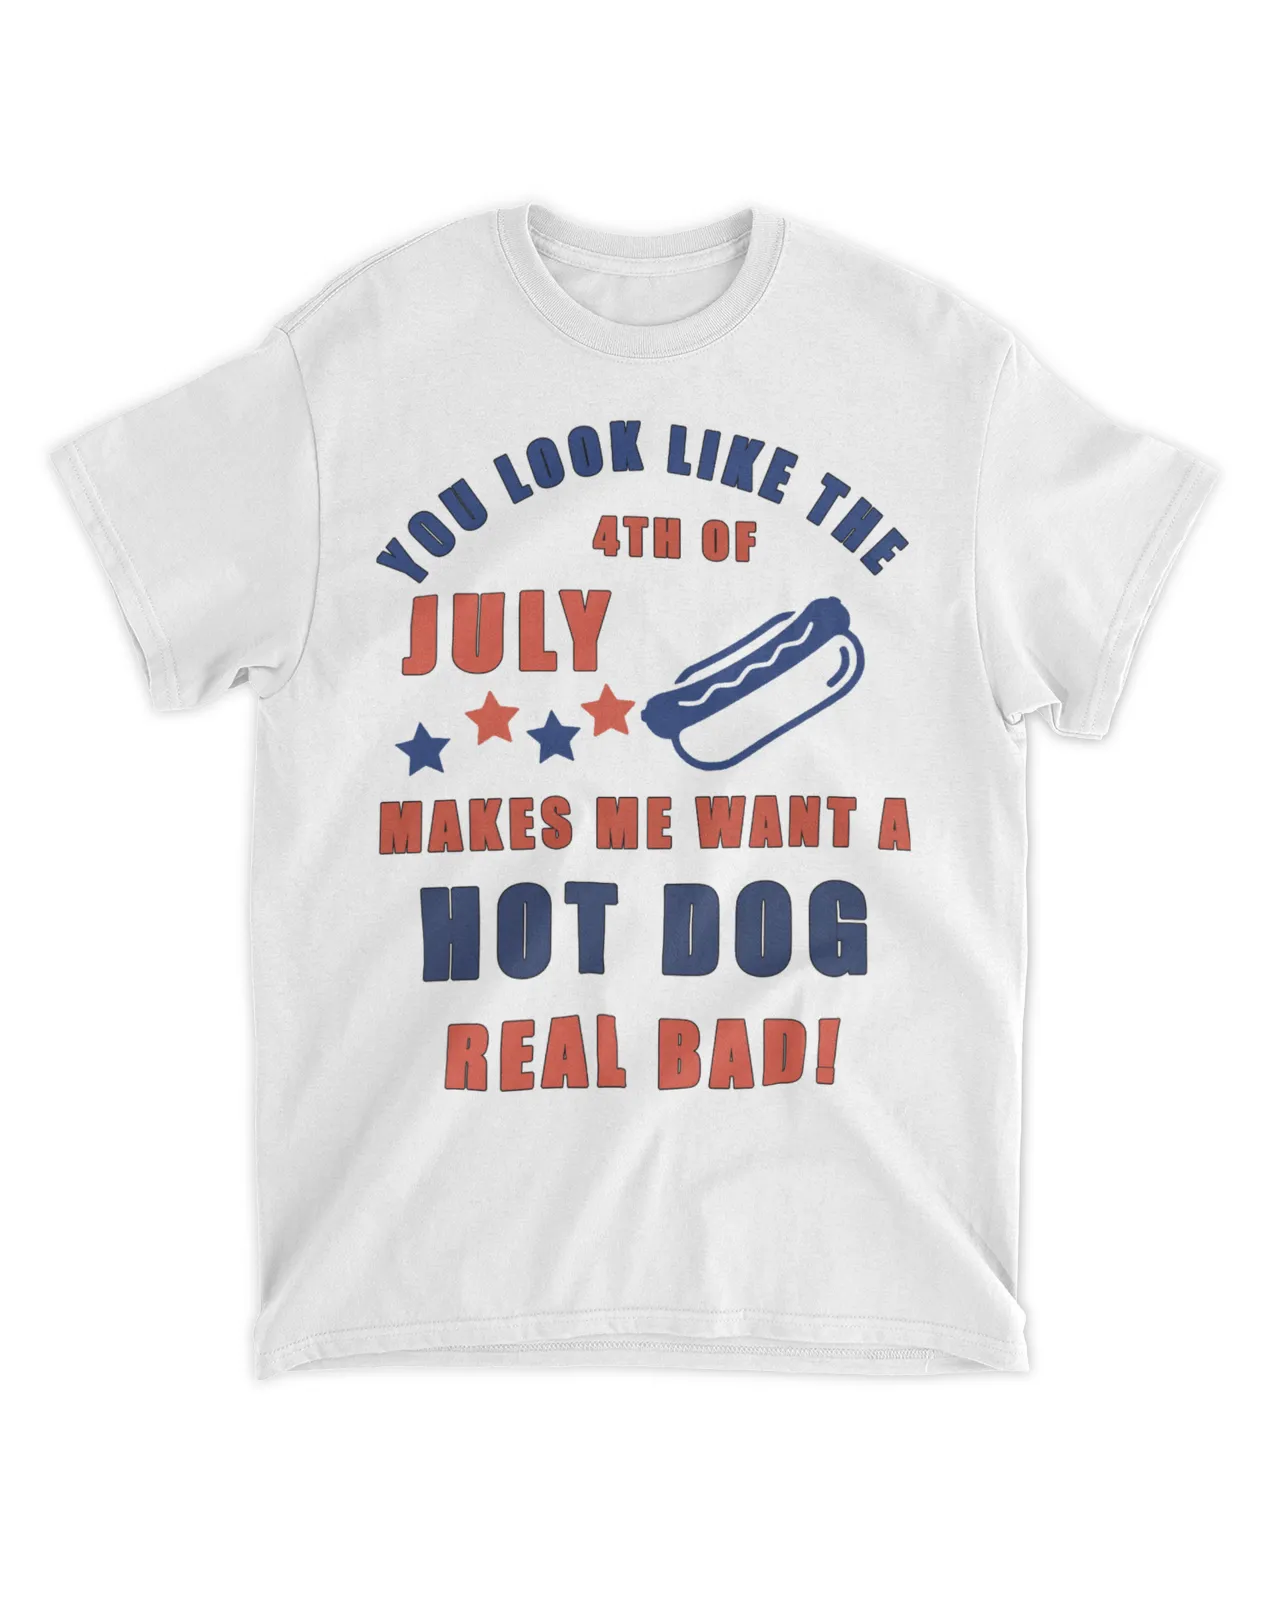  You look like the July 4th of makes me want a hot dog real bad shirt